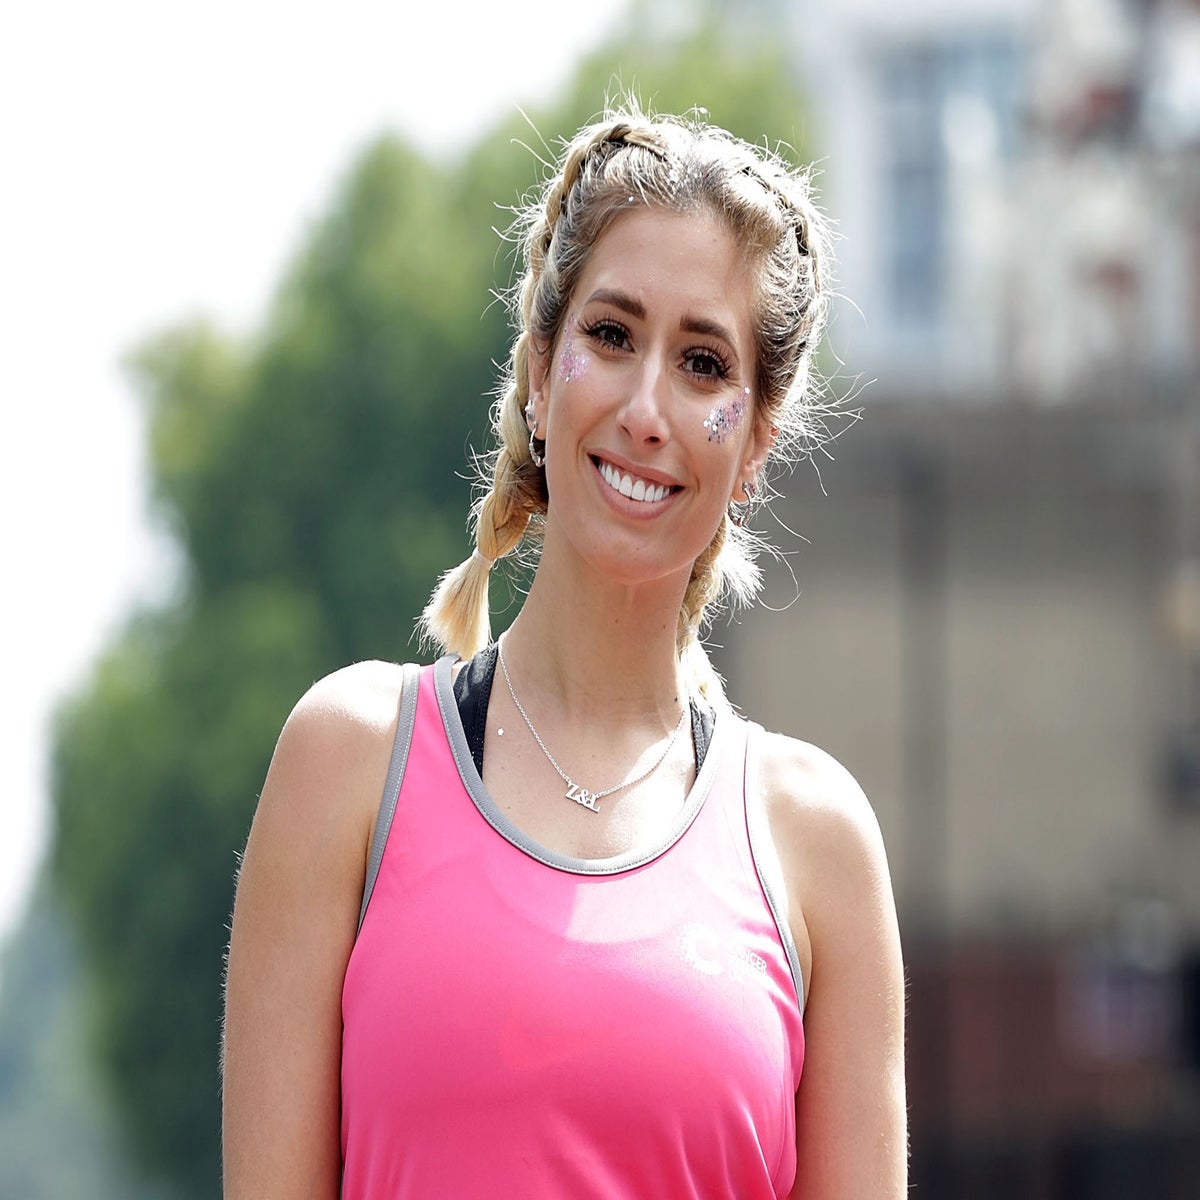 Stacey Solomon says she wants to celebrate her 'muffin top, saggy